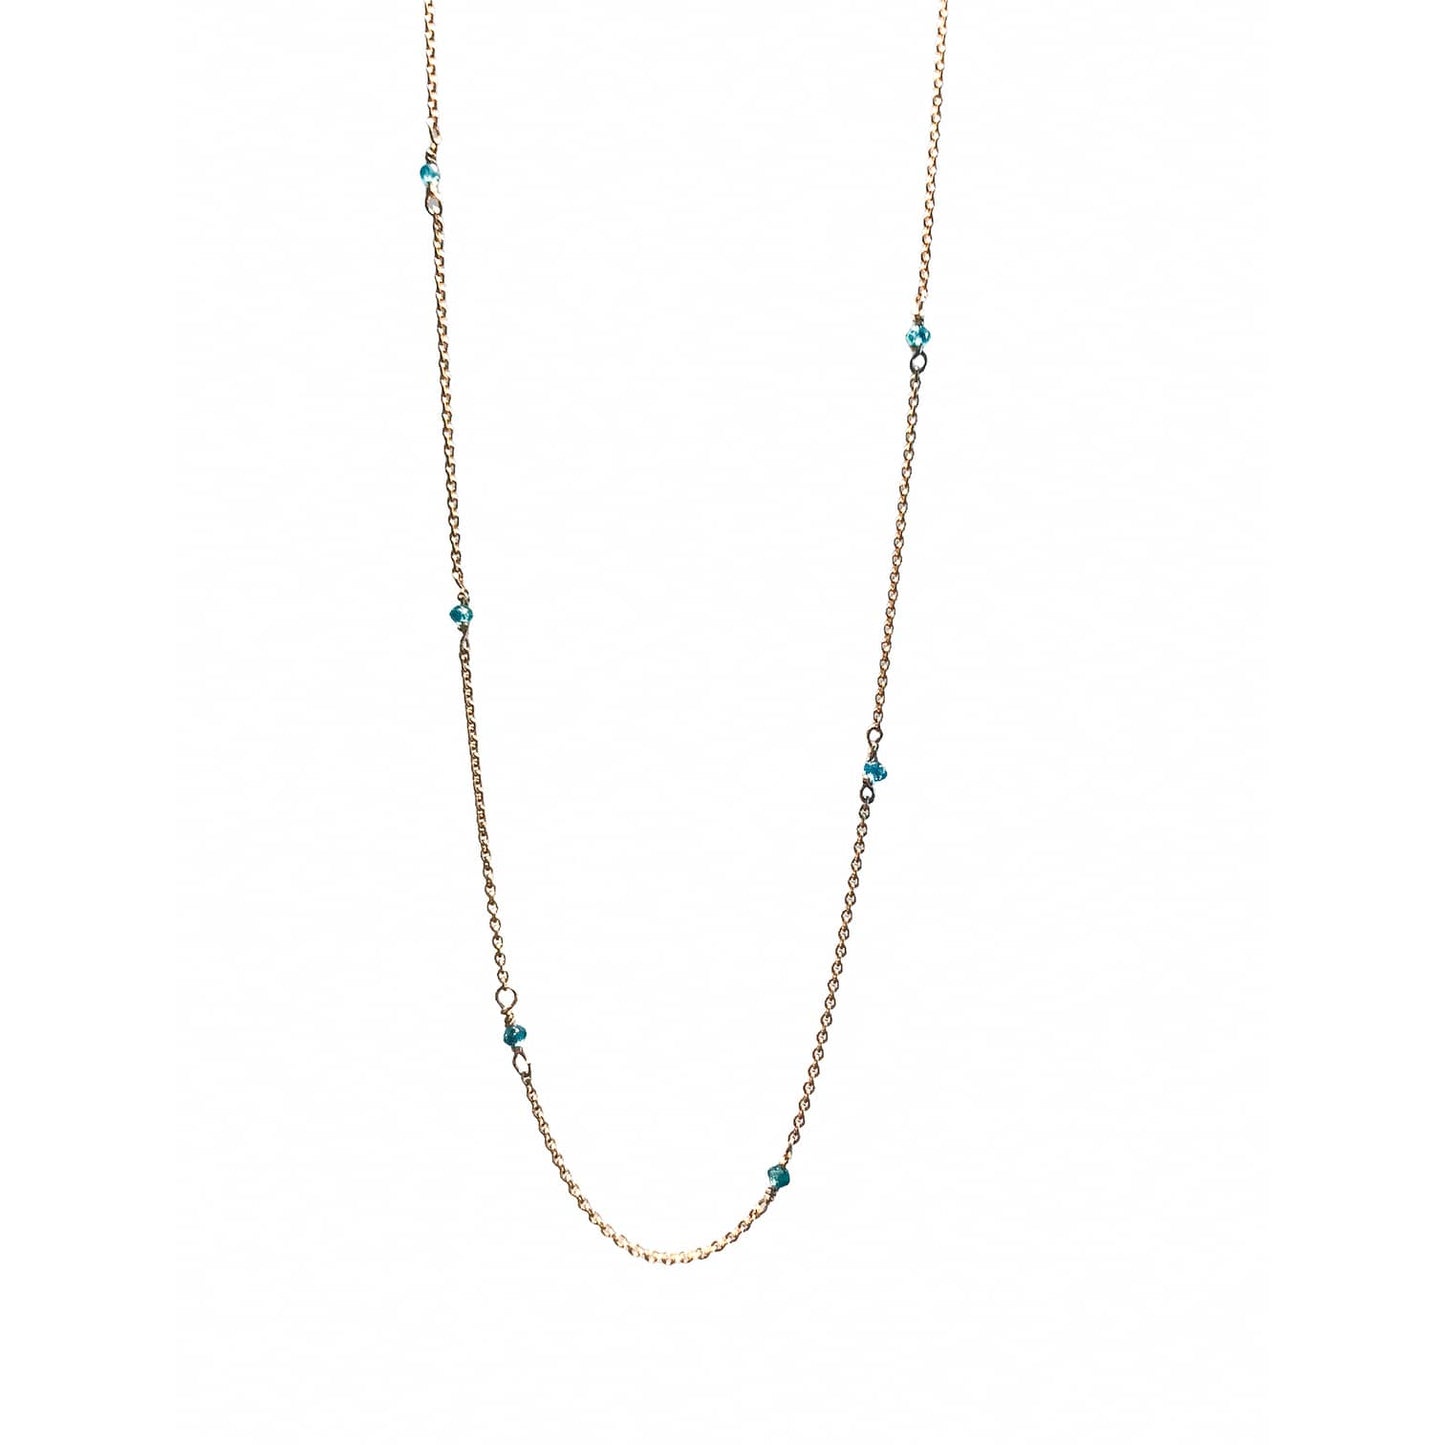 Beads 14 kt gold turquoise diamond necklace, hanging.